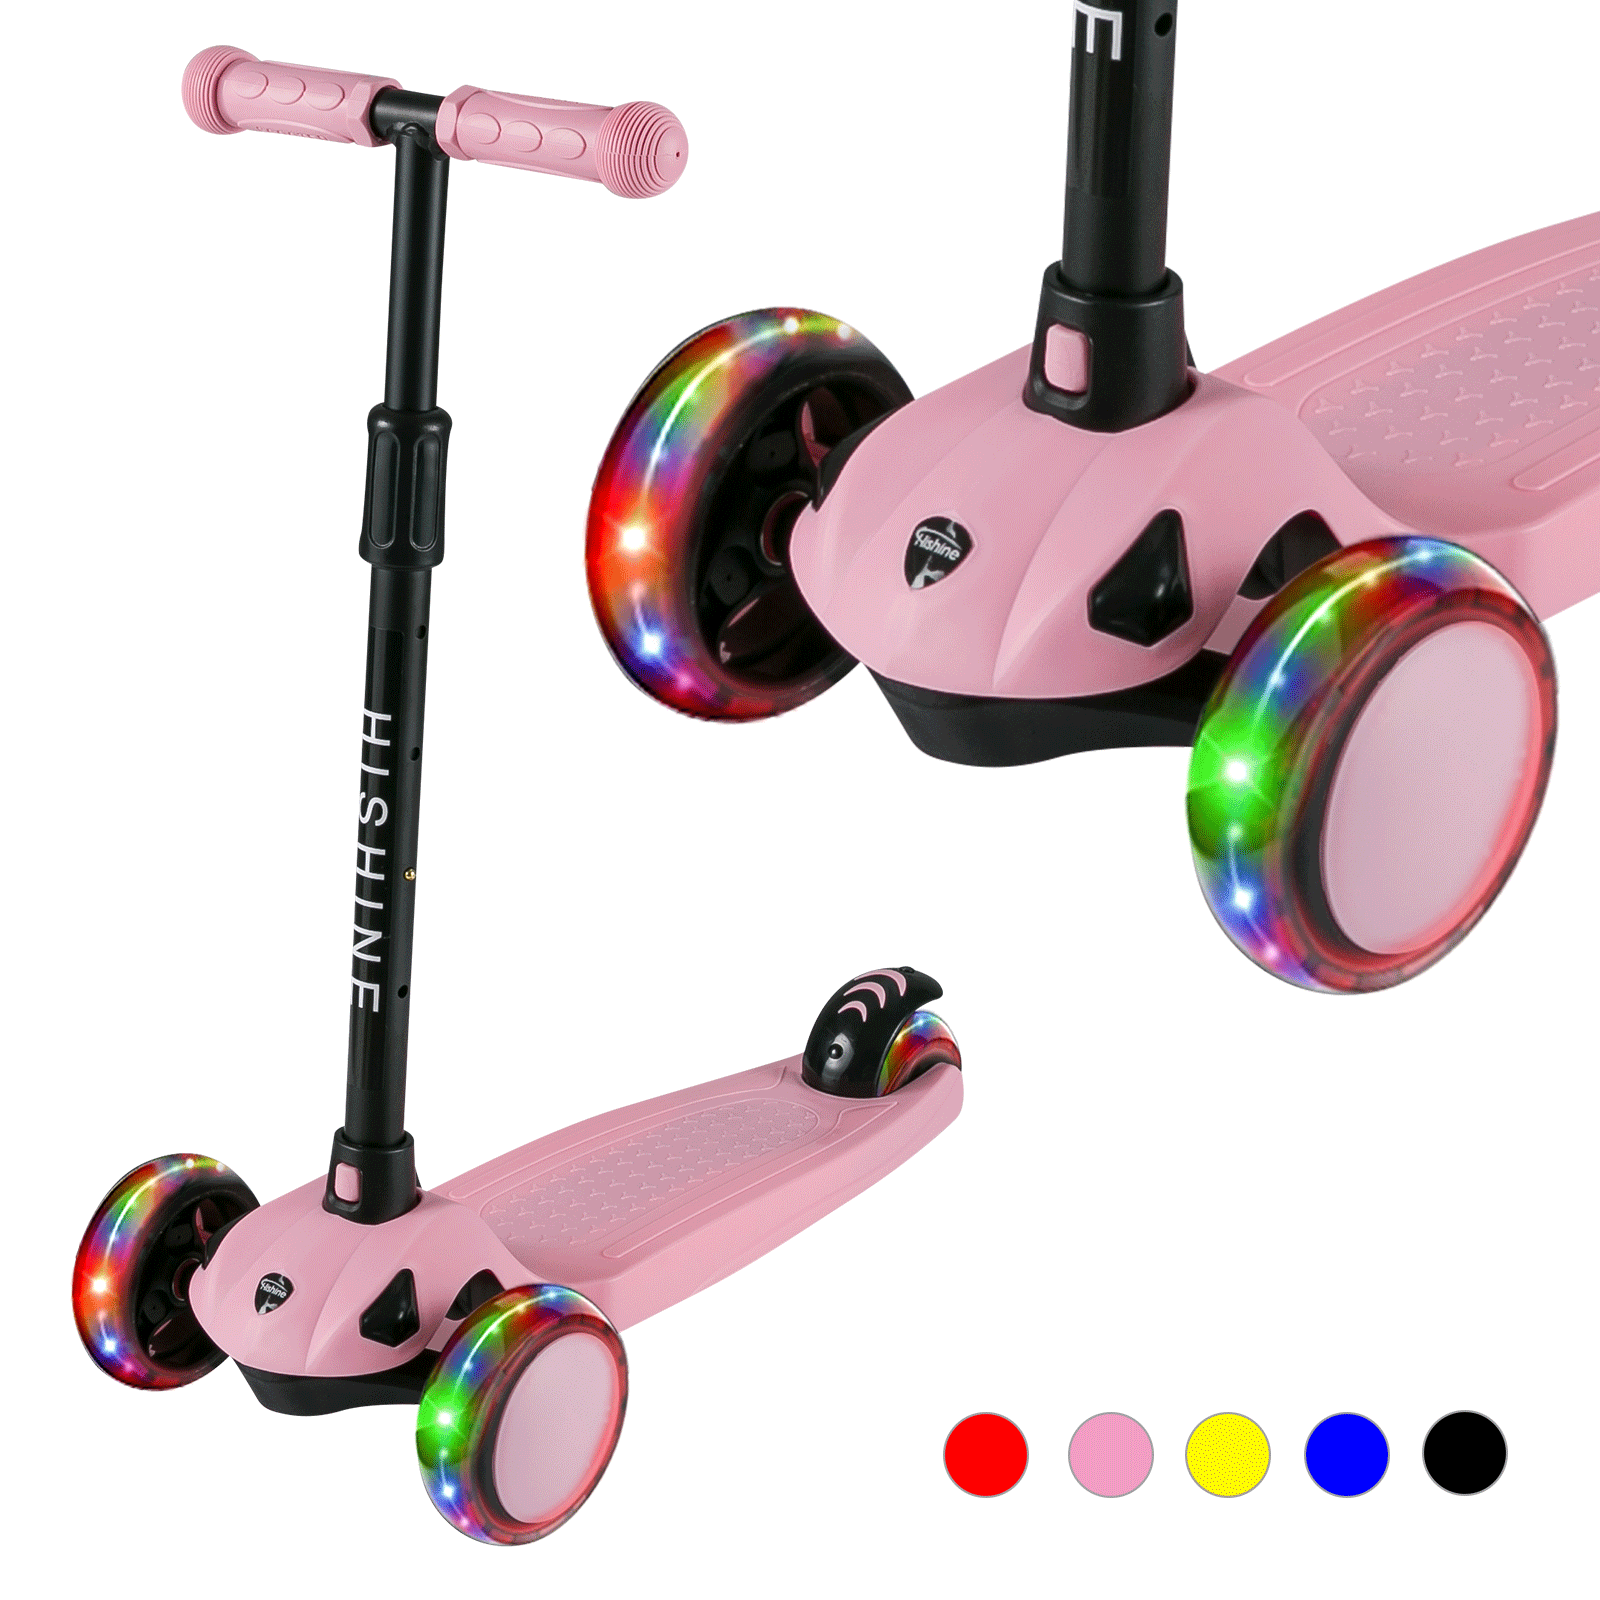 Kick Scooter F Rugged Racers Pink Kick Scooter For Boys  Girls 3 Wheel Scooter 